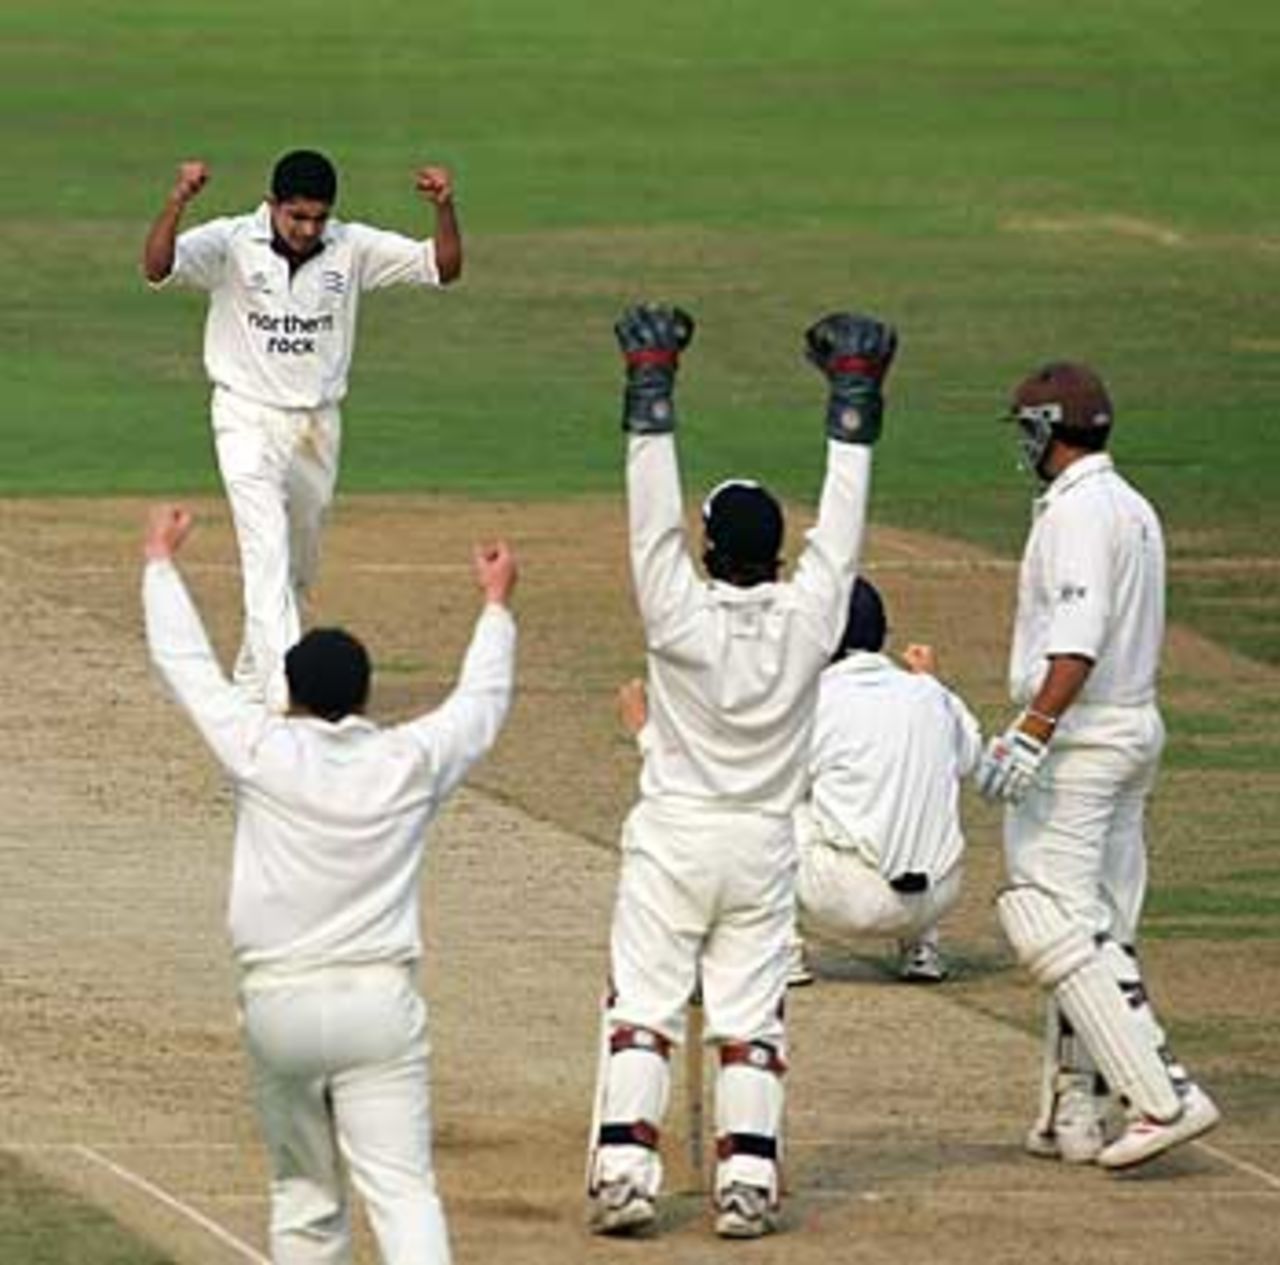 Yogi Golwolkar takes the wicket of Scott Newman to seal Surrey's relegation to Division Two, Surrey v Middlesex, The Oval, September 22, 2005